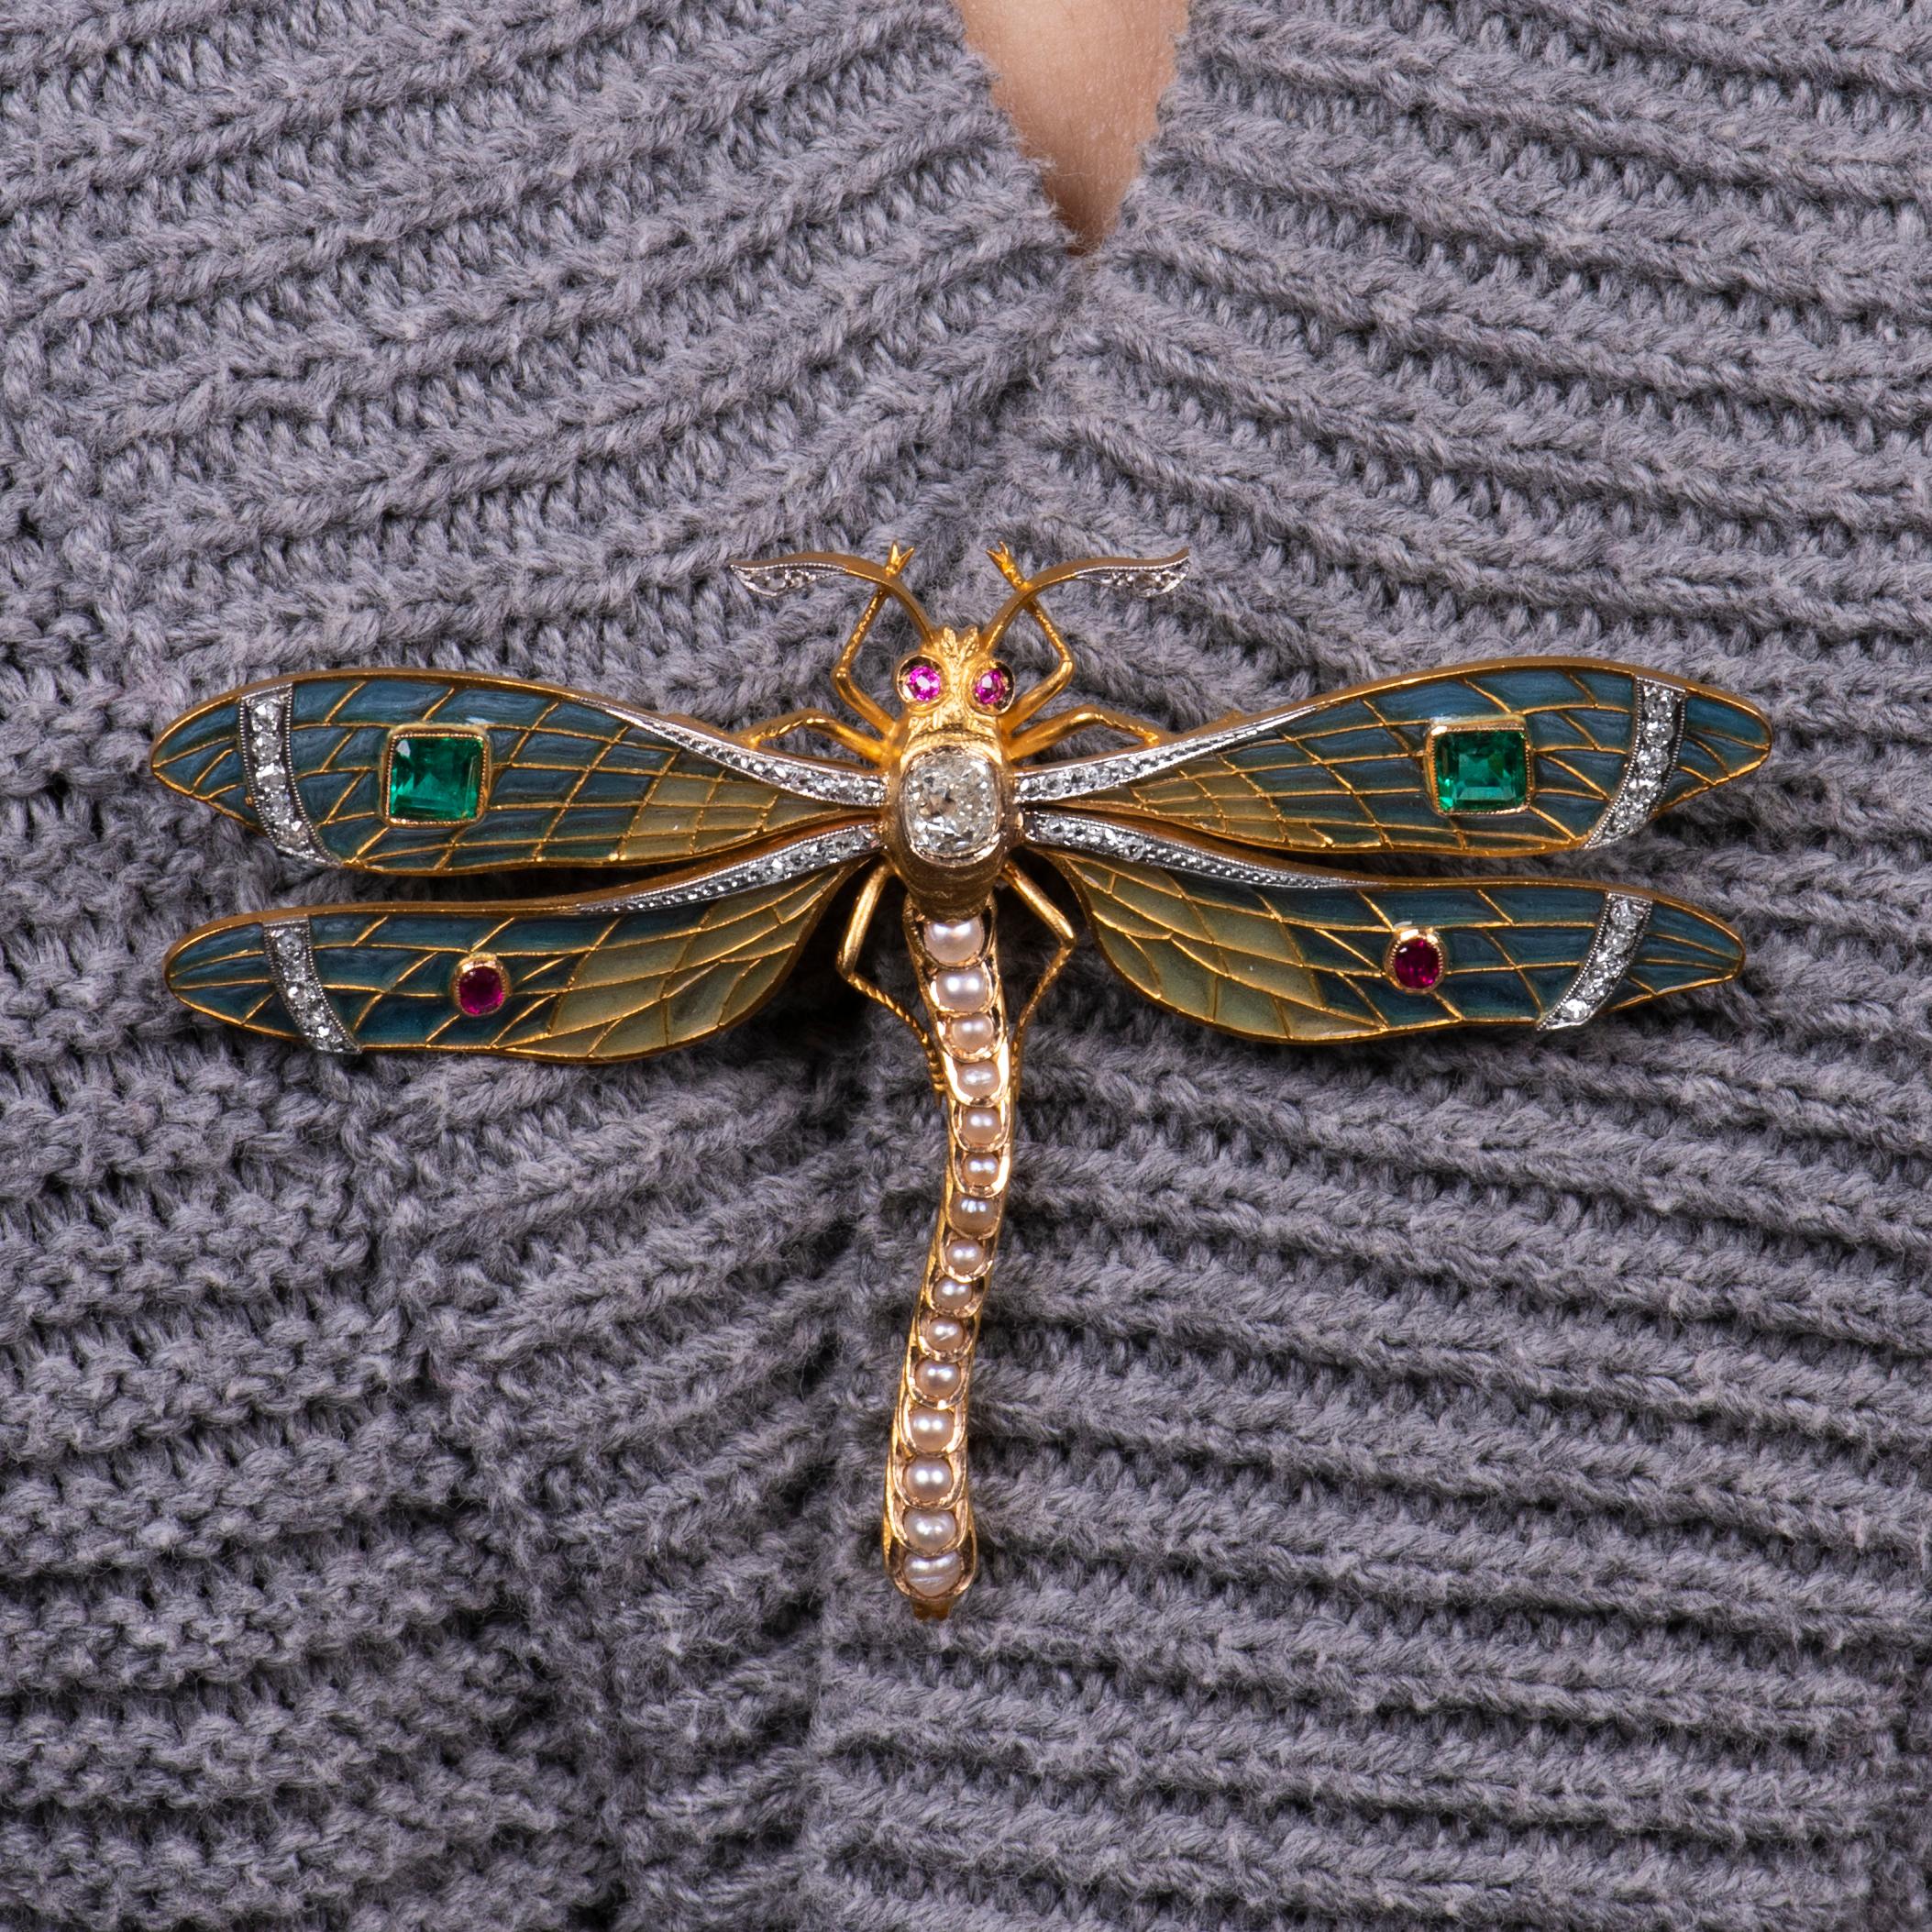 Immaculate plique a jour dragonfly brooch in 22K yellow gold with one 0.90 carat fine cushion brilliant diamond, 2 fine emerald cut natural emeralds of approx 0.70ct total, measuring approximately 4.05mm each, .25 carats in four natural rubies and a